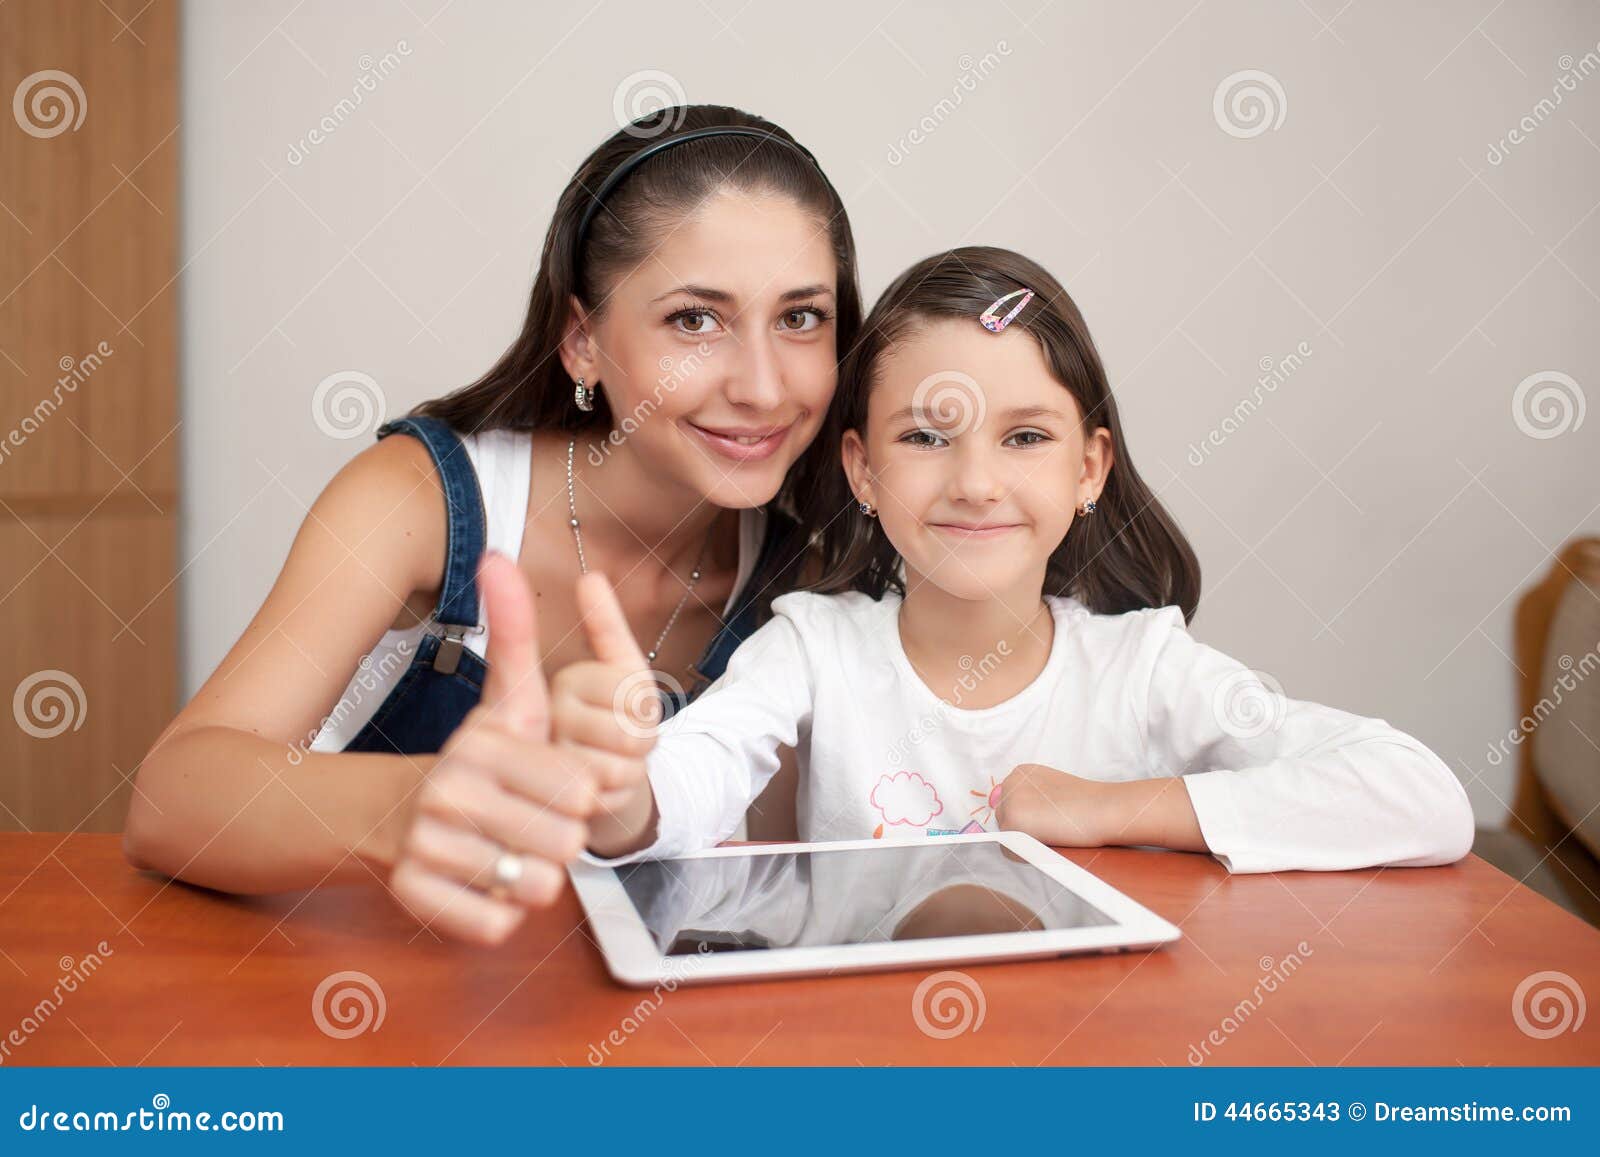 Mother and Daughter Showing Thumb Stock Image - Image of house, focus ...